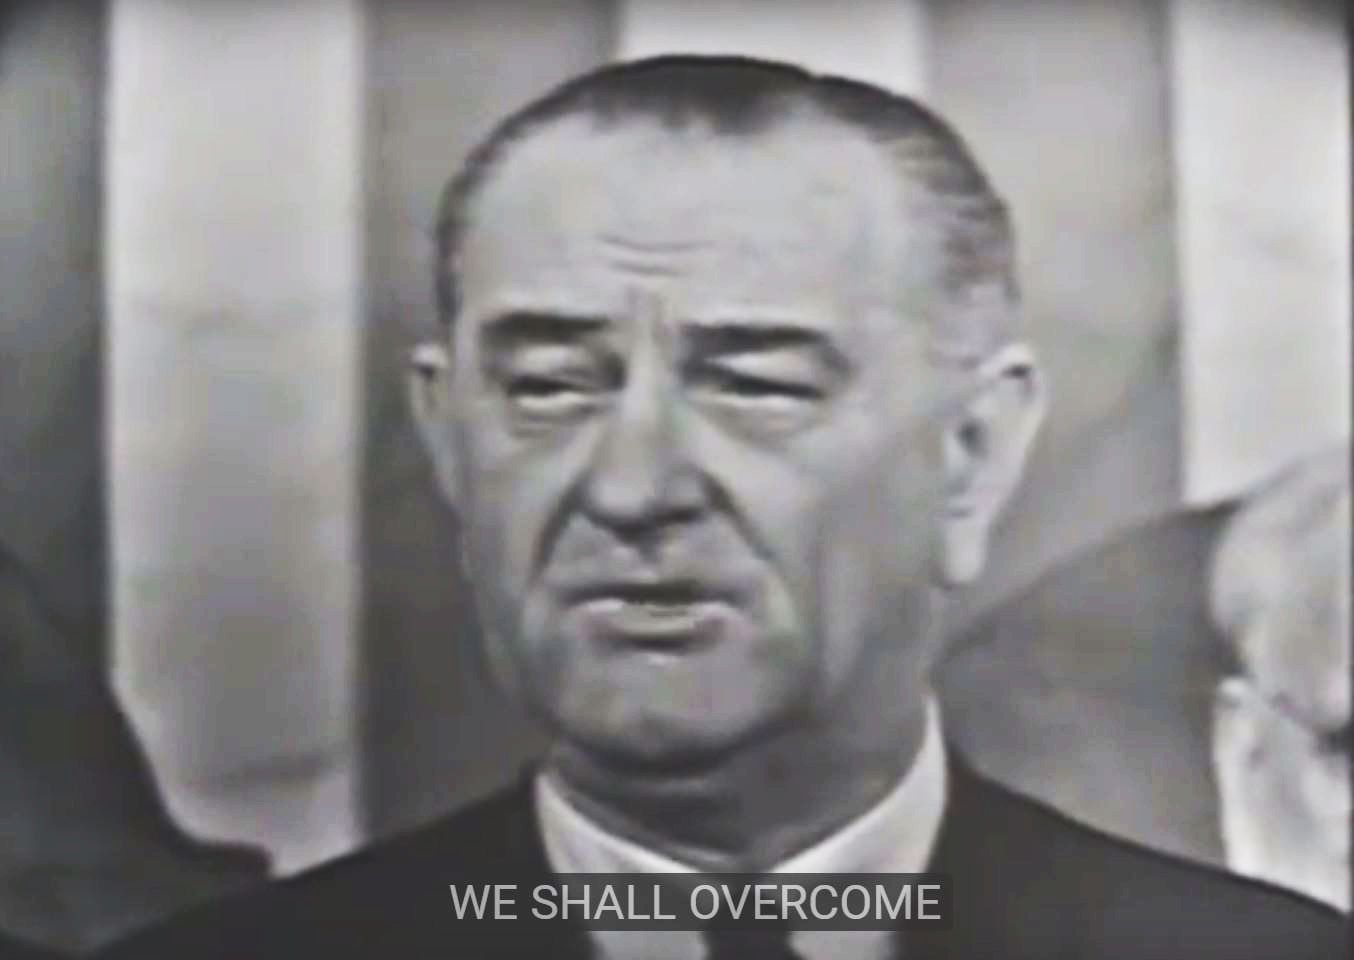 In a speech to Congress in 1965, Lyndon Johnson said that "We Shall Overcome."